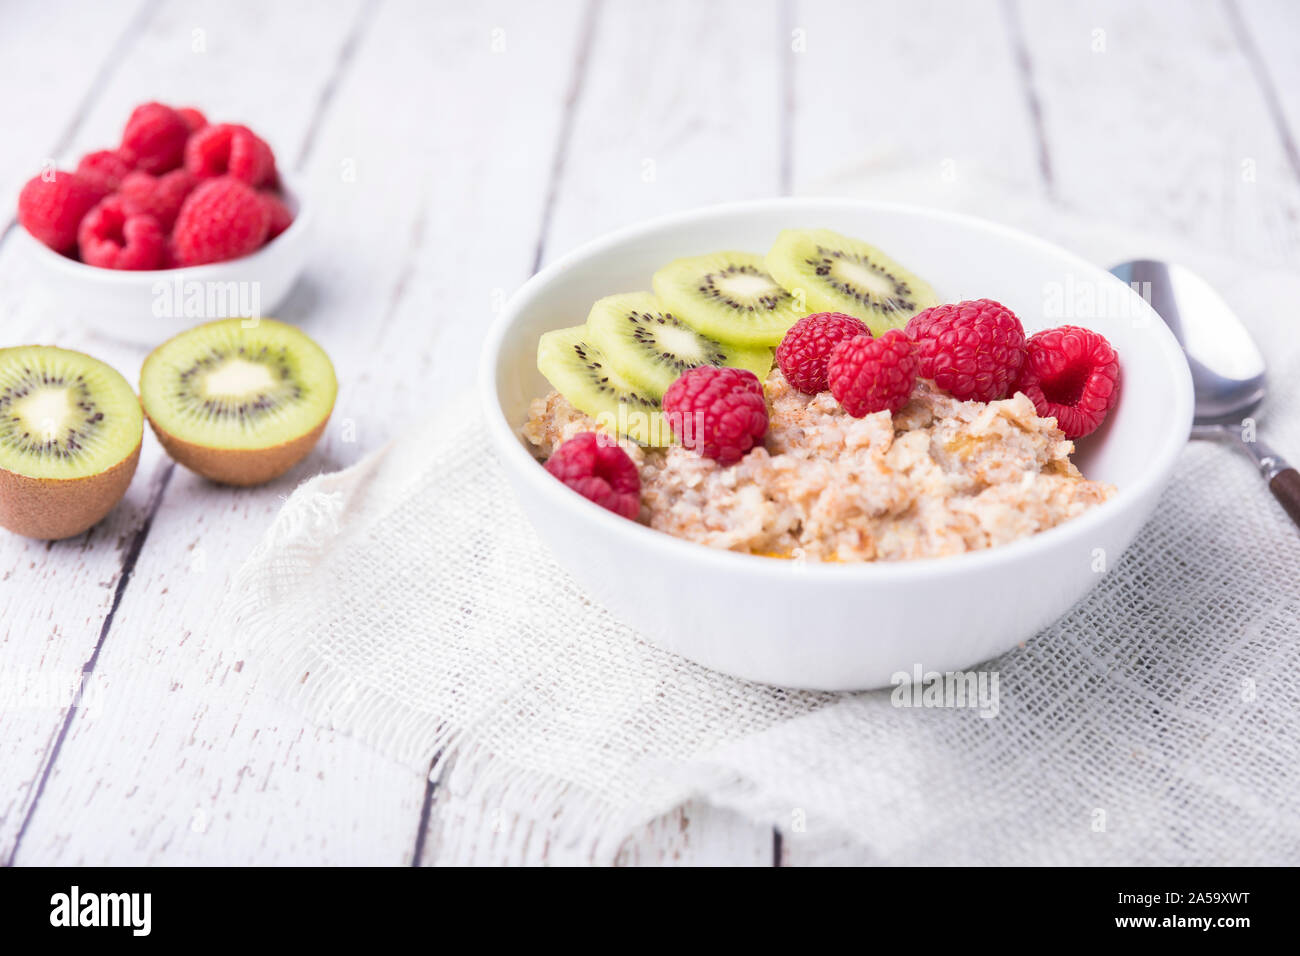 Organic healthy oatmeal porridge with fresh raspberries and kiwi. The white porcelain bowl is on a white wooden table, with a textile cloth underneath Stock Photo